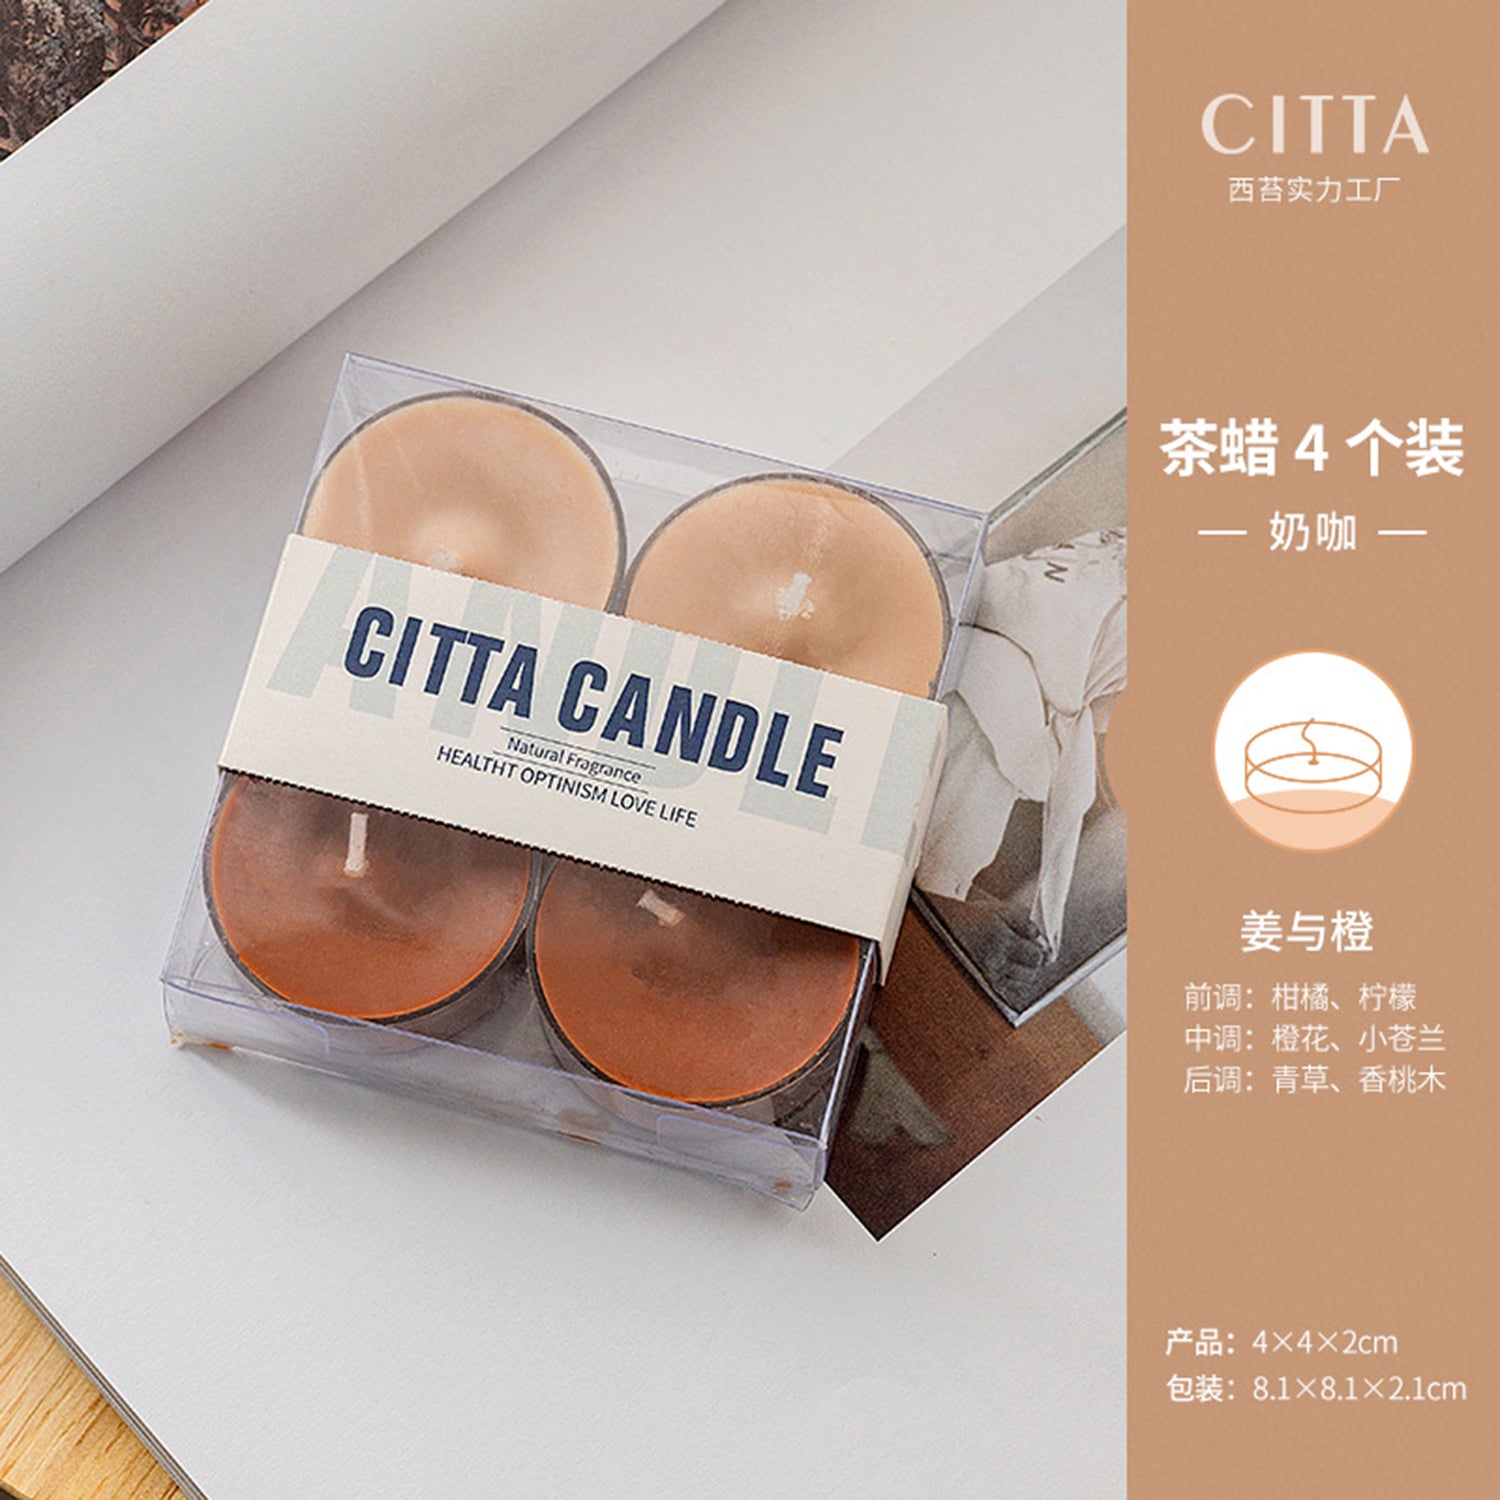 CITTA Elegant Series Scented Candle Aromantic Natural Soy Wax 15G Home Fragrance Aromatherapy (Pack Of 4) Scented Candle CITTA Orange and Ginger 